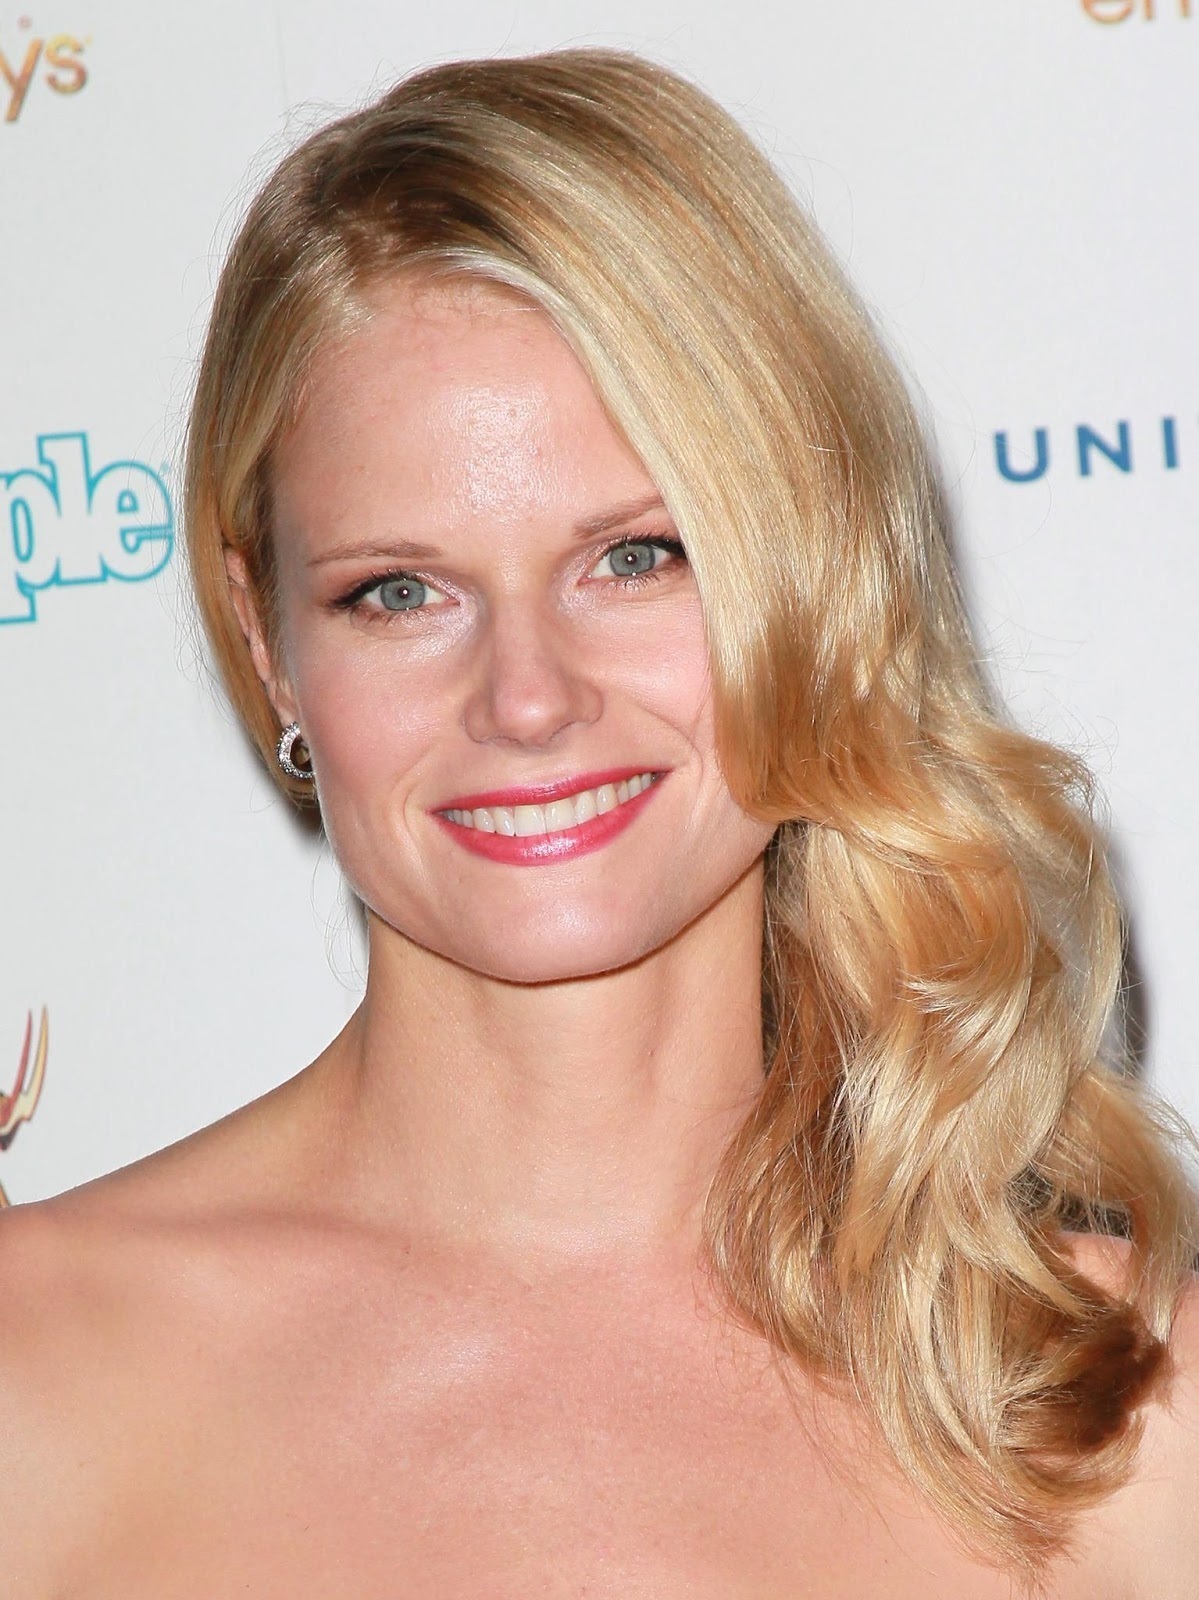 joelle-carter-young